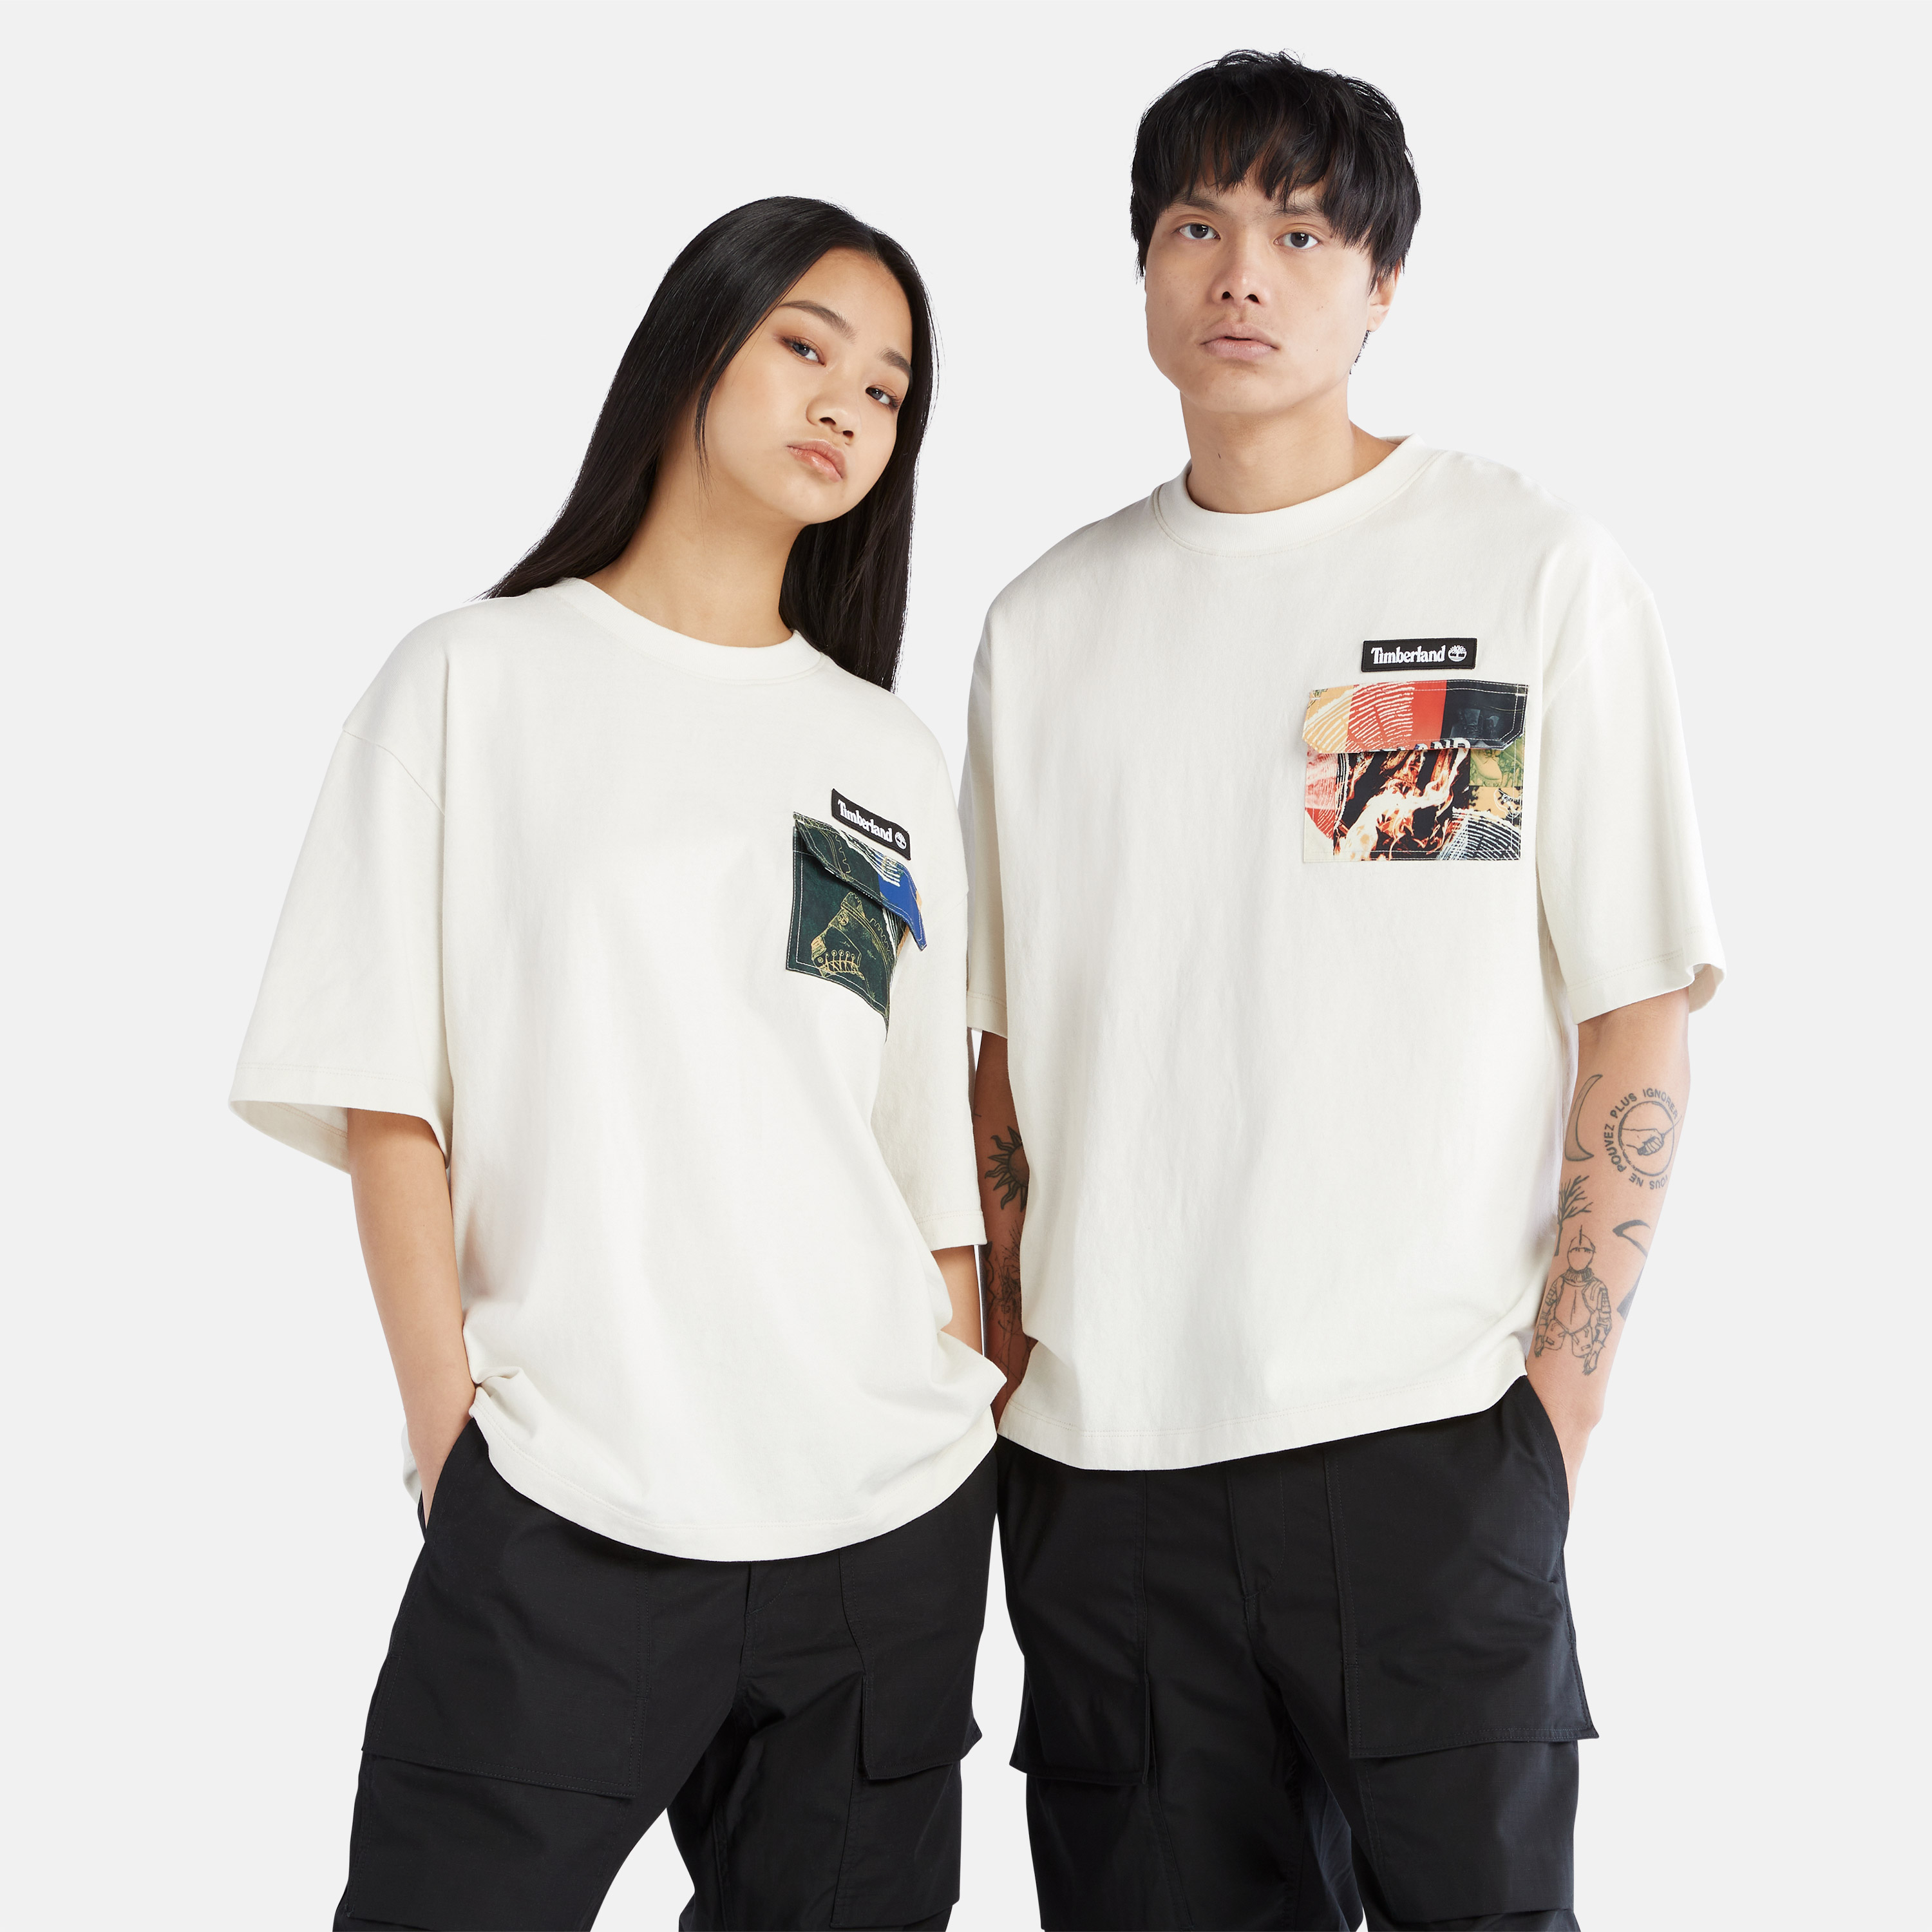 Men's All-Gender Lunar New Year Pocket Tee - Timberland - Malaysia